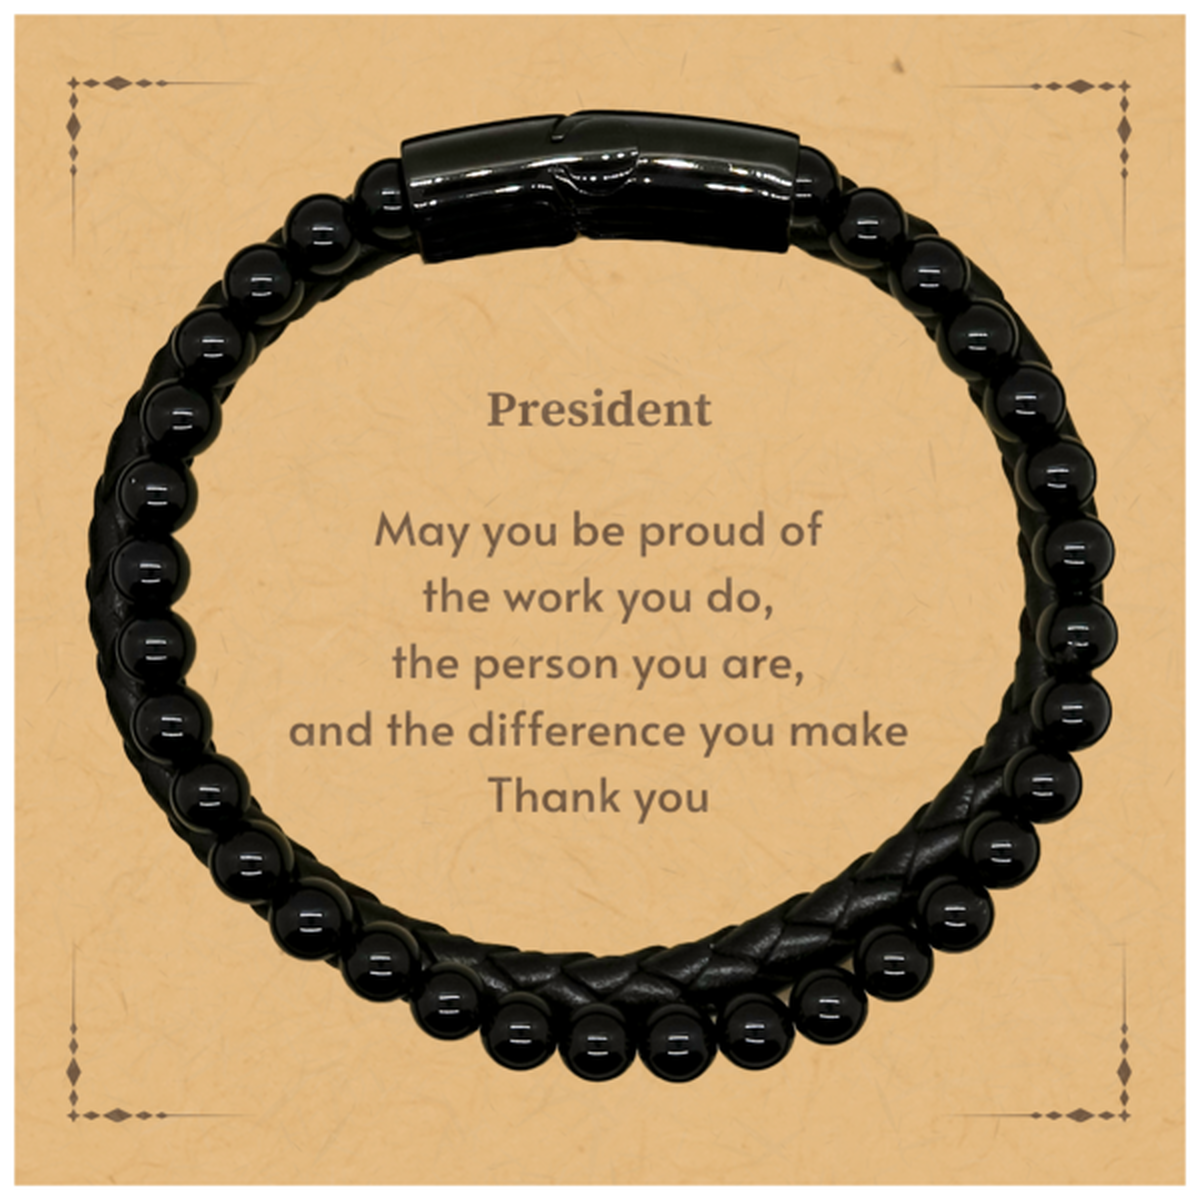 Heartwarming Stone Leather Bracelets Retirement Coworkers Gifts for President, President May You be proud of the work you do, the person you are Gifts for Boss Men Women Friends